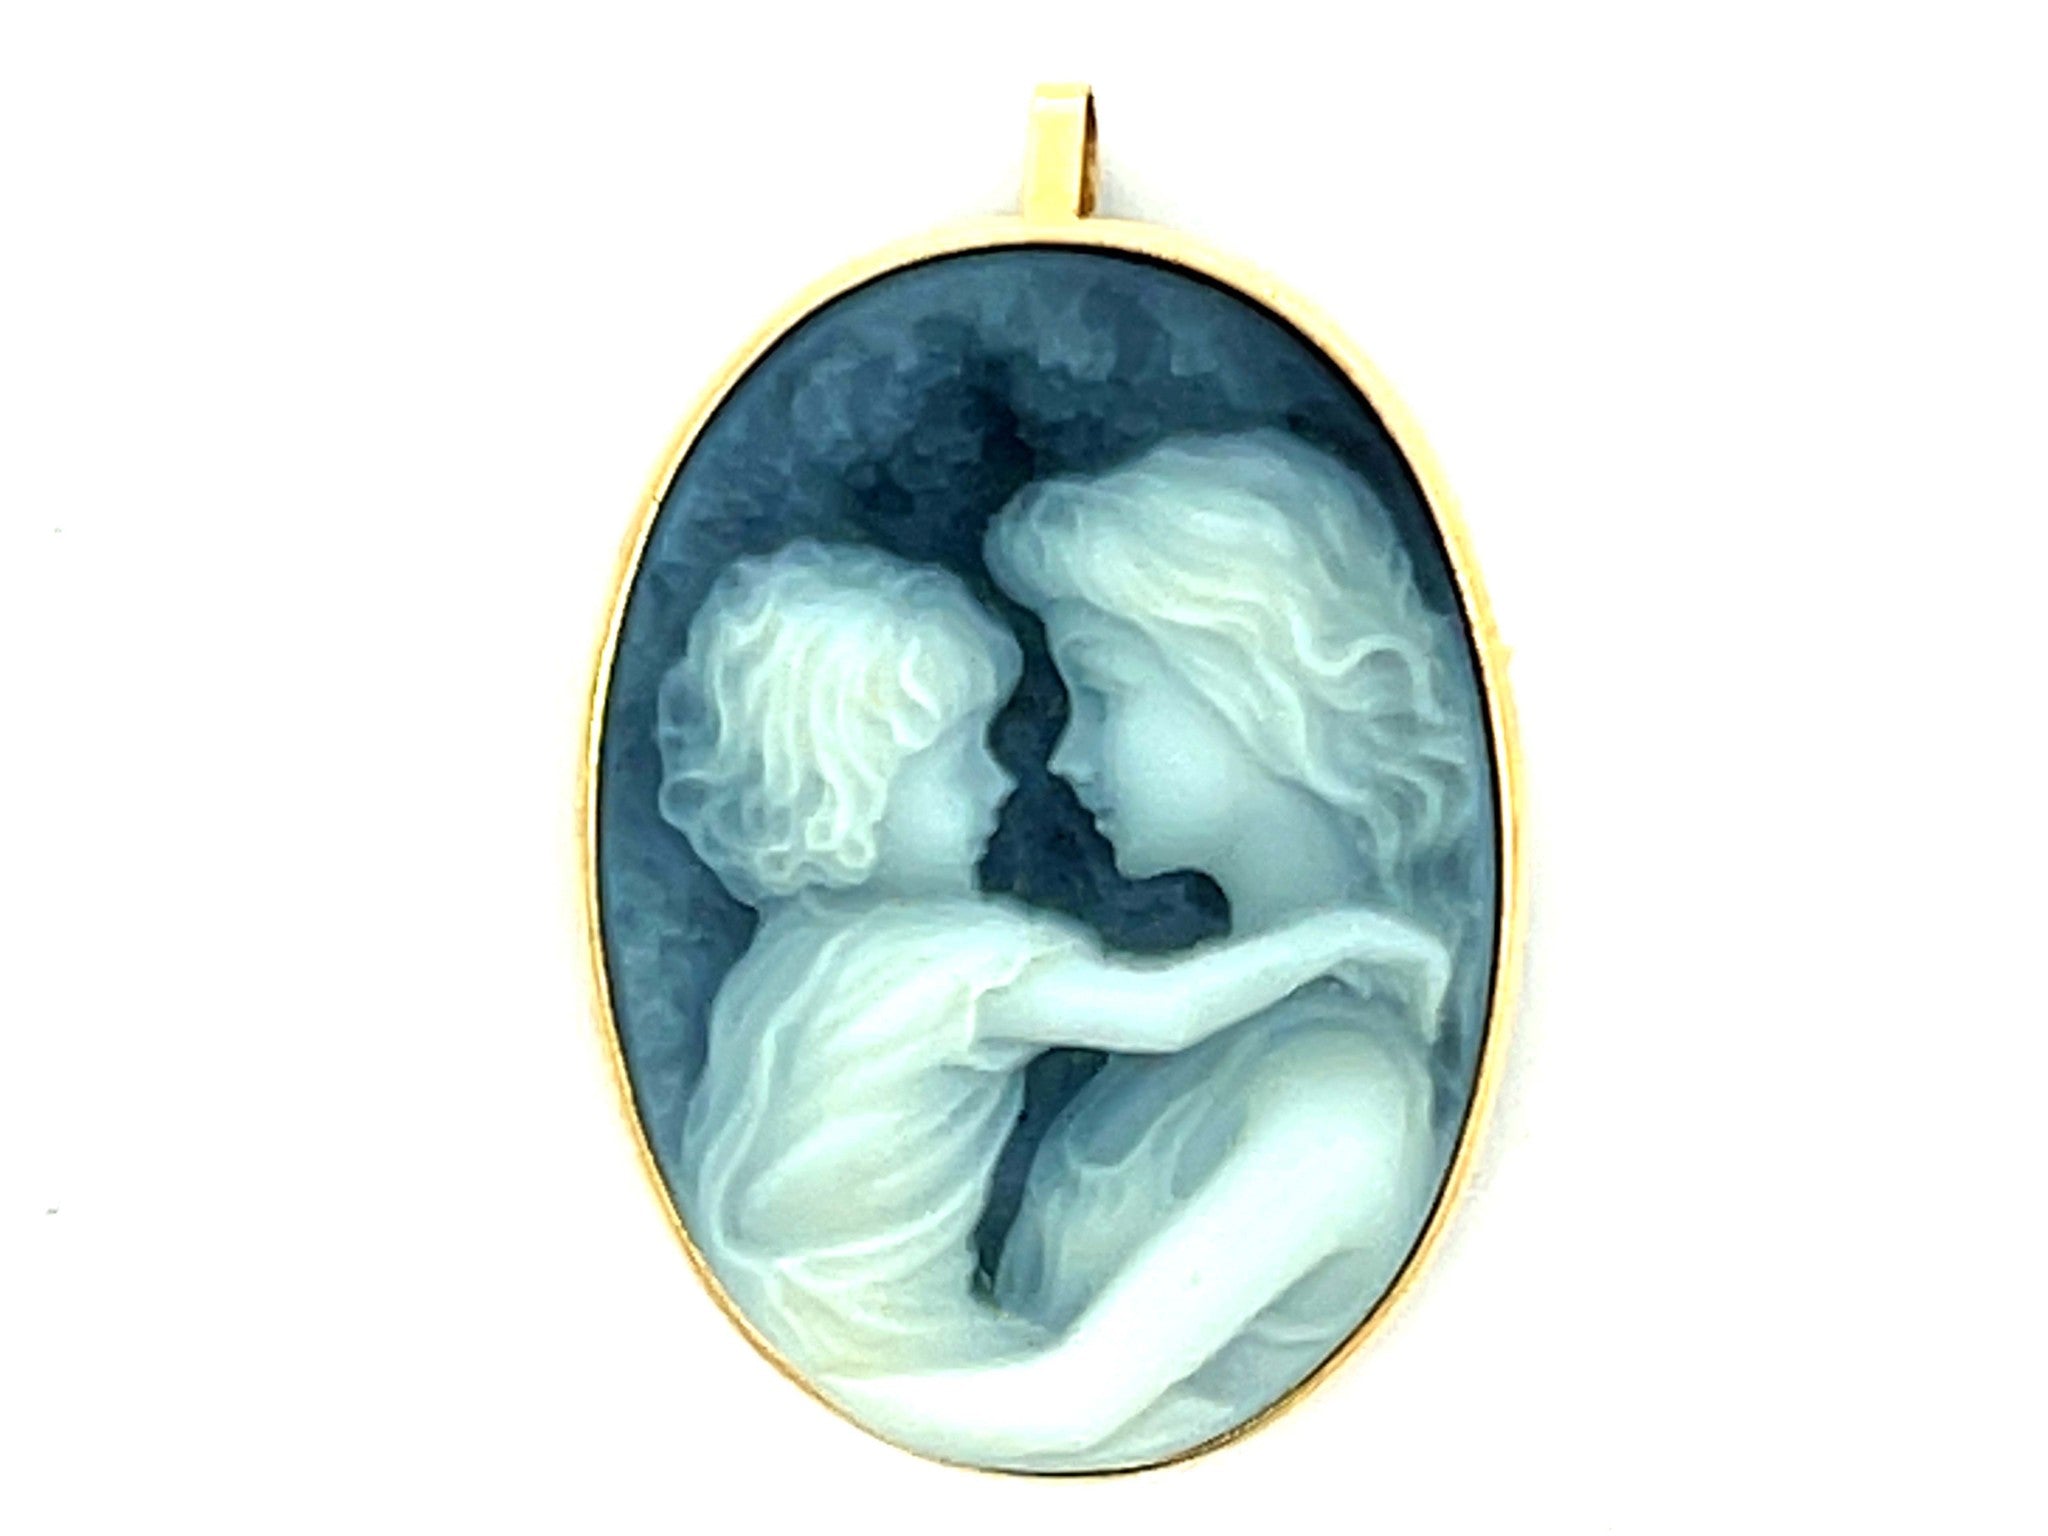 Oval Mother and Child Cameo Pendant/Brooch 14k Yellow Gold